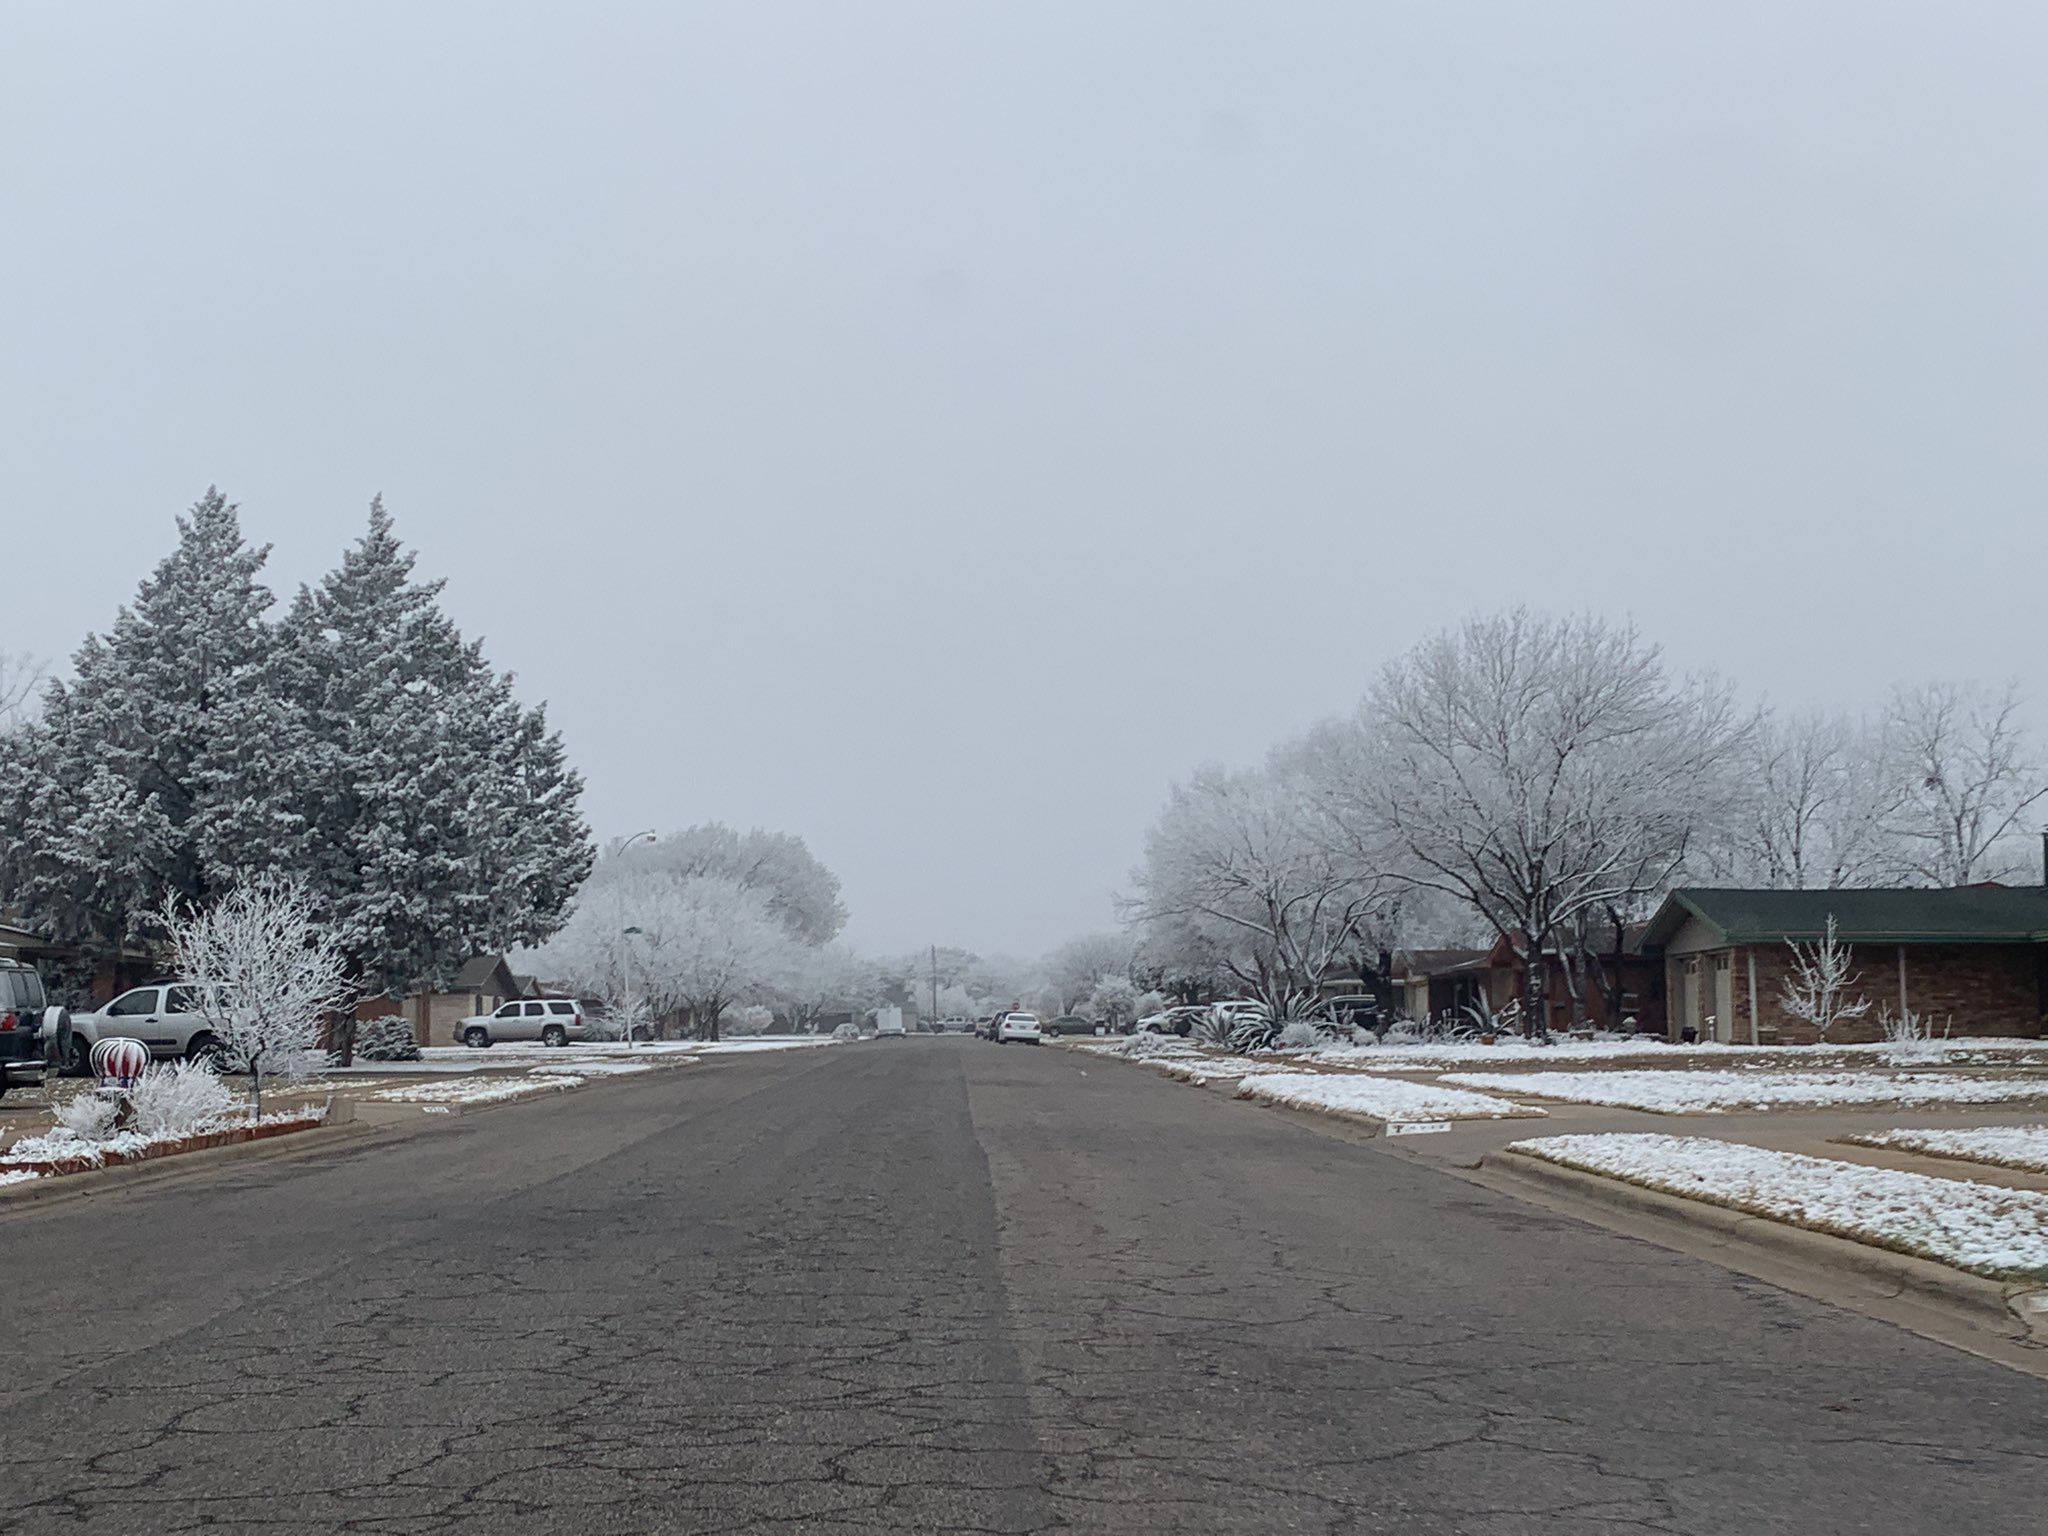 Northwest Lubbock plants covered in white after periods of freezing fog and freezing drizzle. The image was taken by @SAMT_WX on Wednesday evening (10 February).